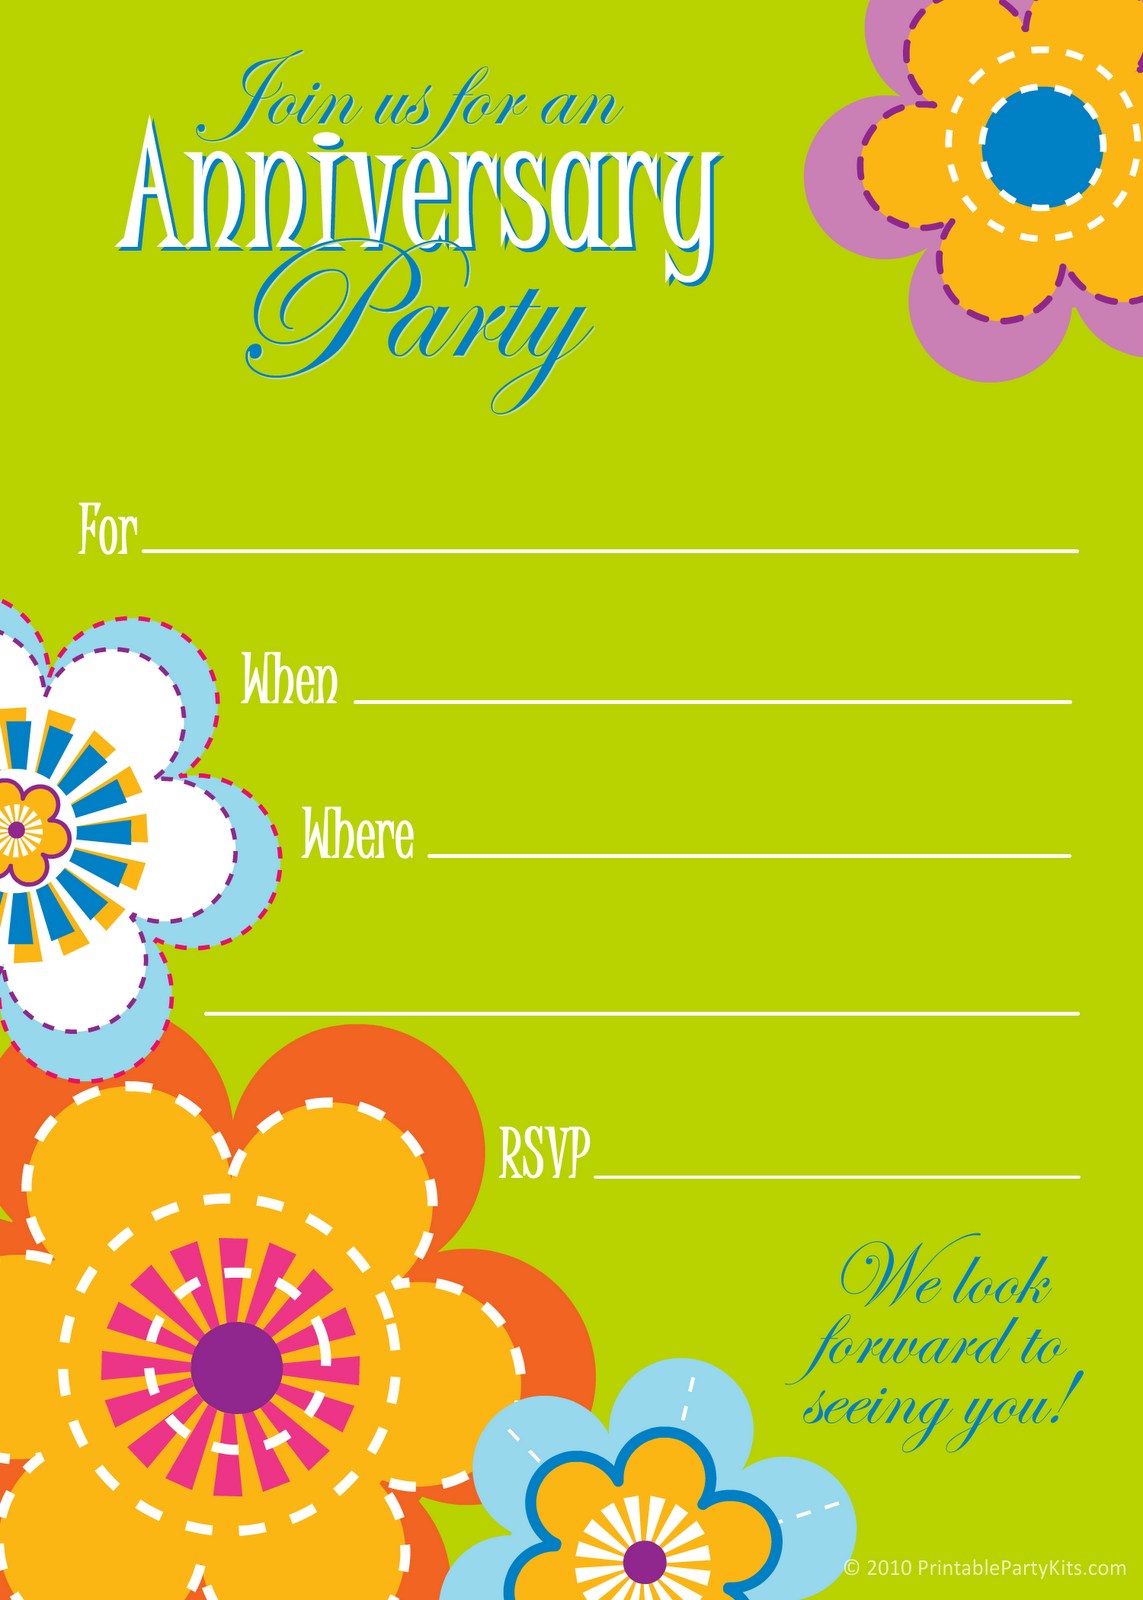 free-printable-party-invitations-wedding-anniversary-party